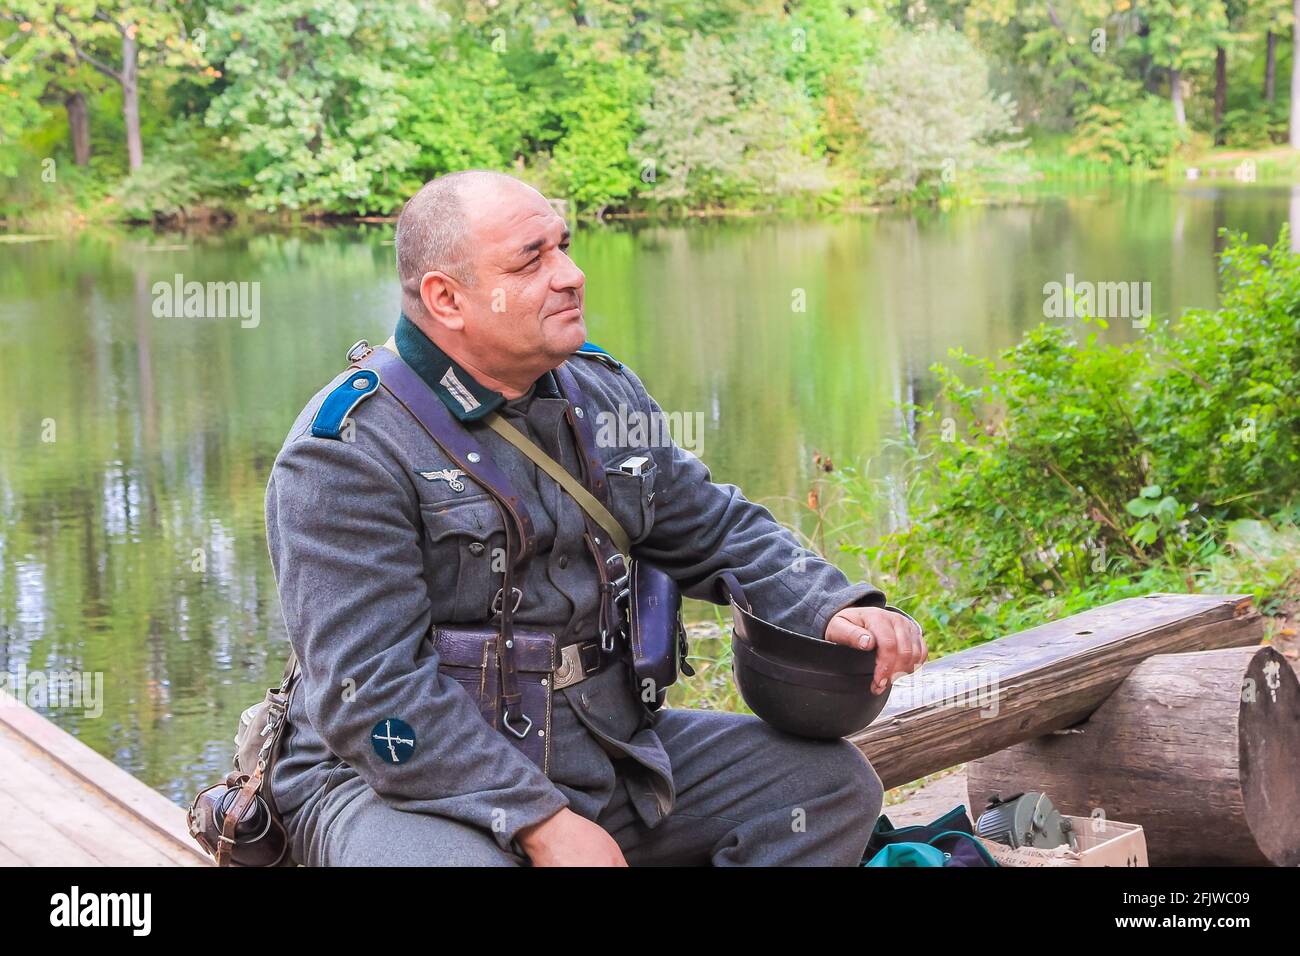 Reconstruction of the times of the Great Patriotic War. A German soldier is resting before the battle. Moscow Russia September 16, 2017 Stock Photo